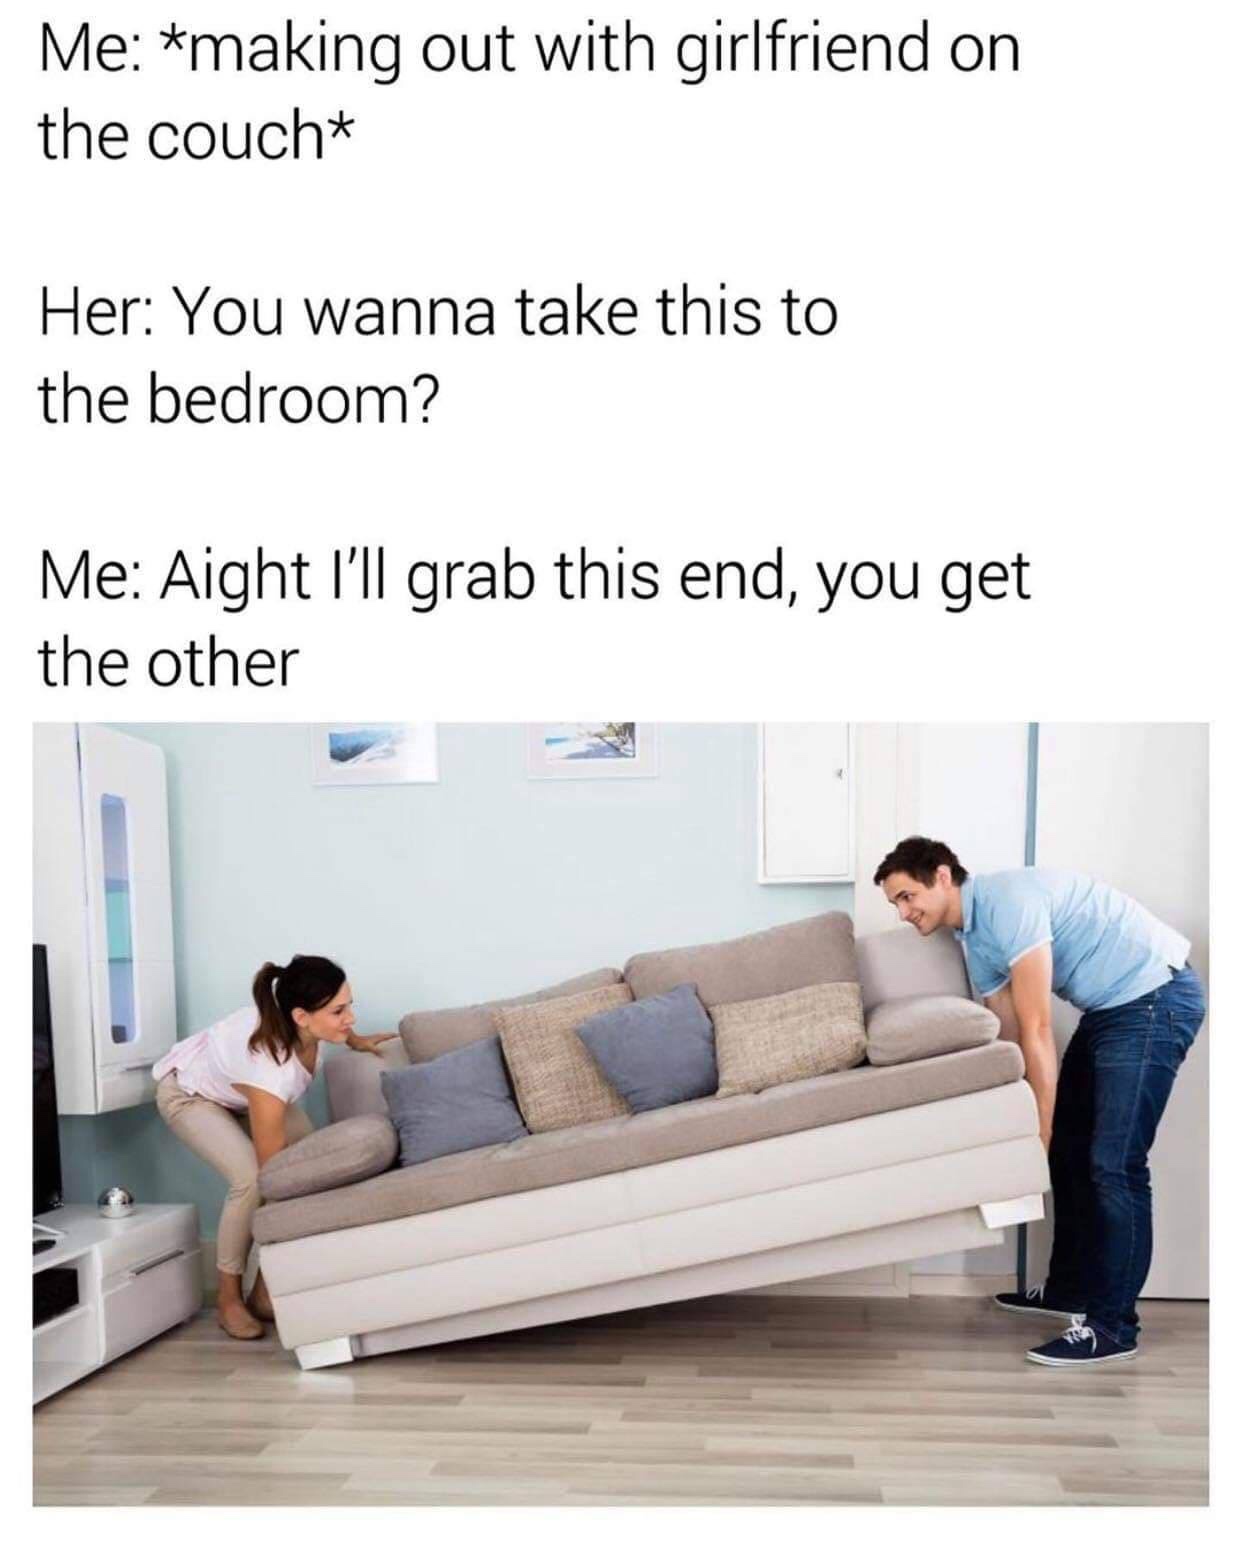 dank memes - funny memes - wanna take this to the bedroom meme - Me making out with girlfriend on the coucht Her You wanna take this to the bedroom? Me Aight I'll grab this end, you get the other